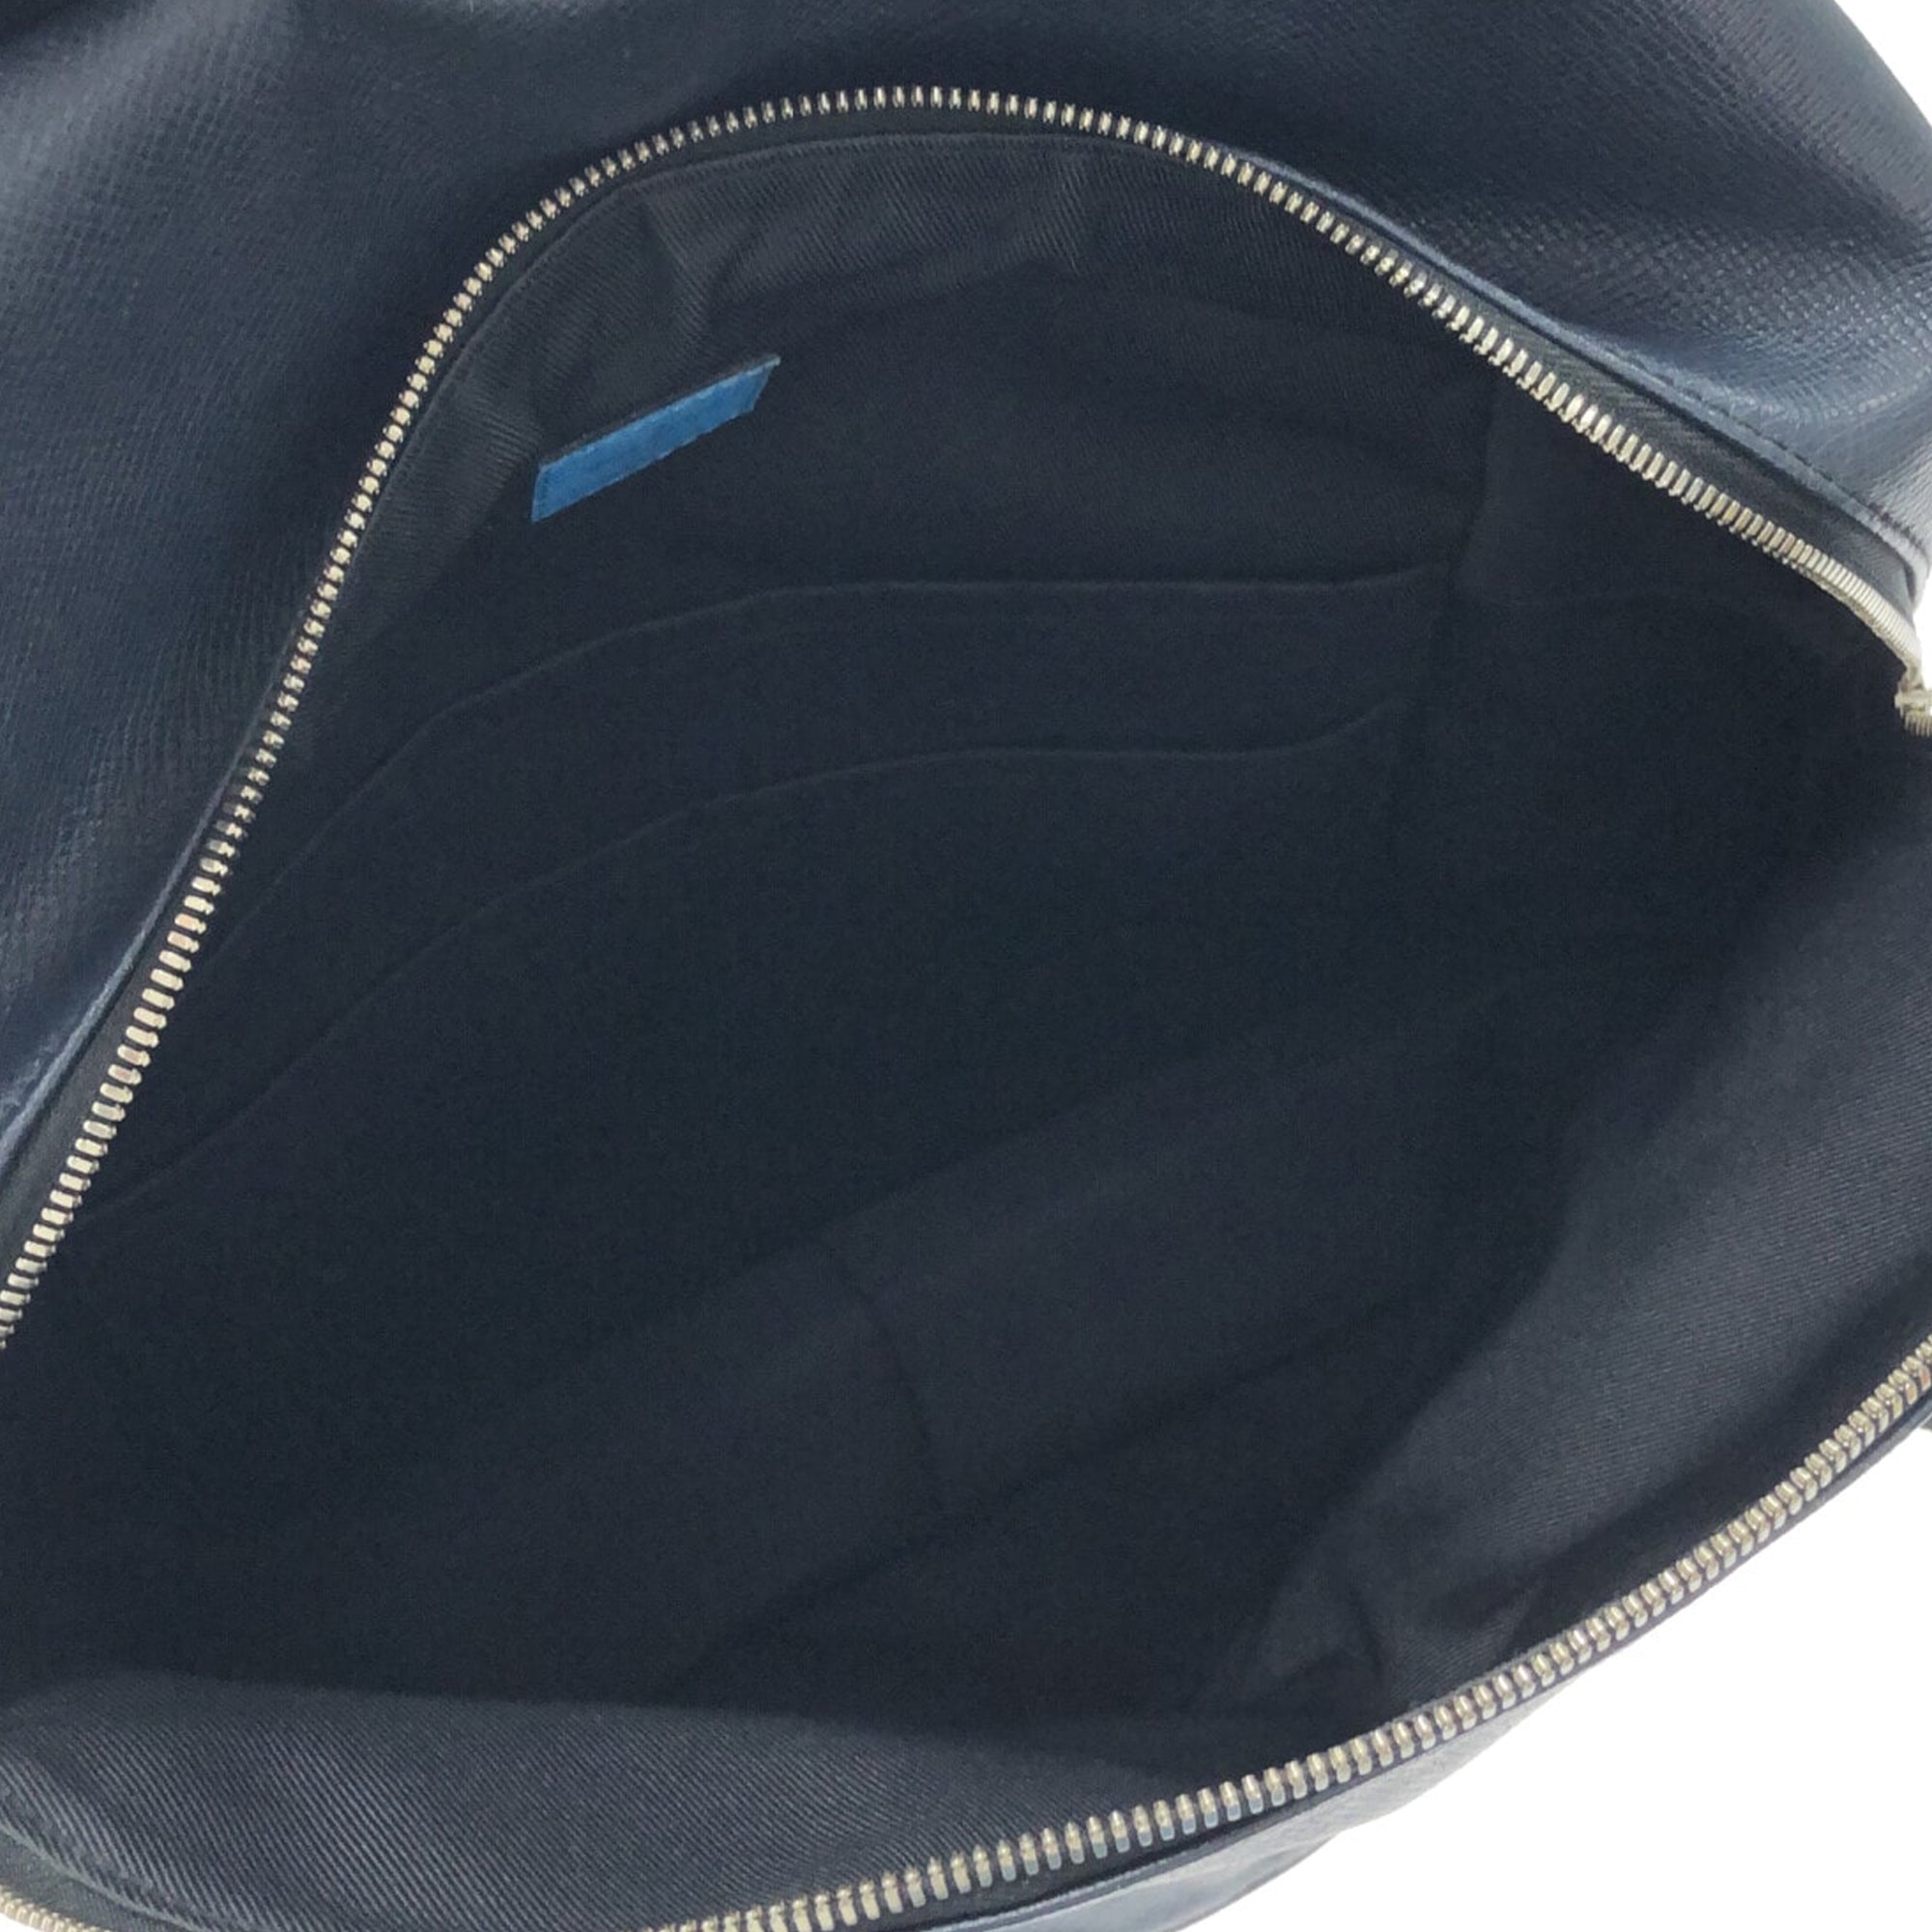 Blue Louis Vuitton Articles de Voyage Taiga Discovery Backpack PM